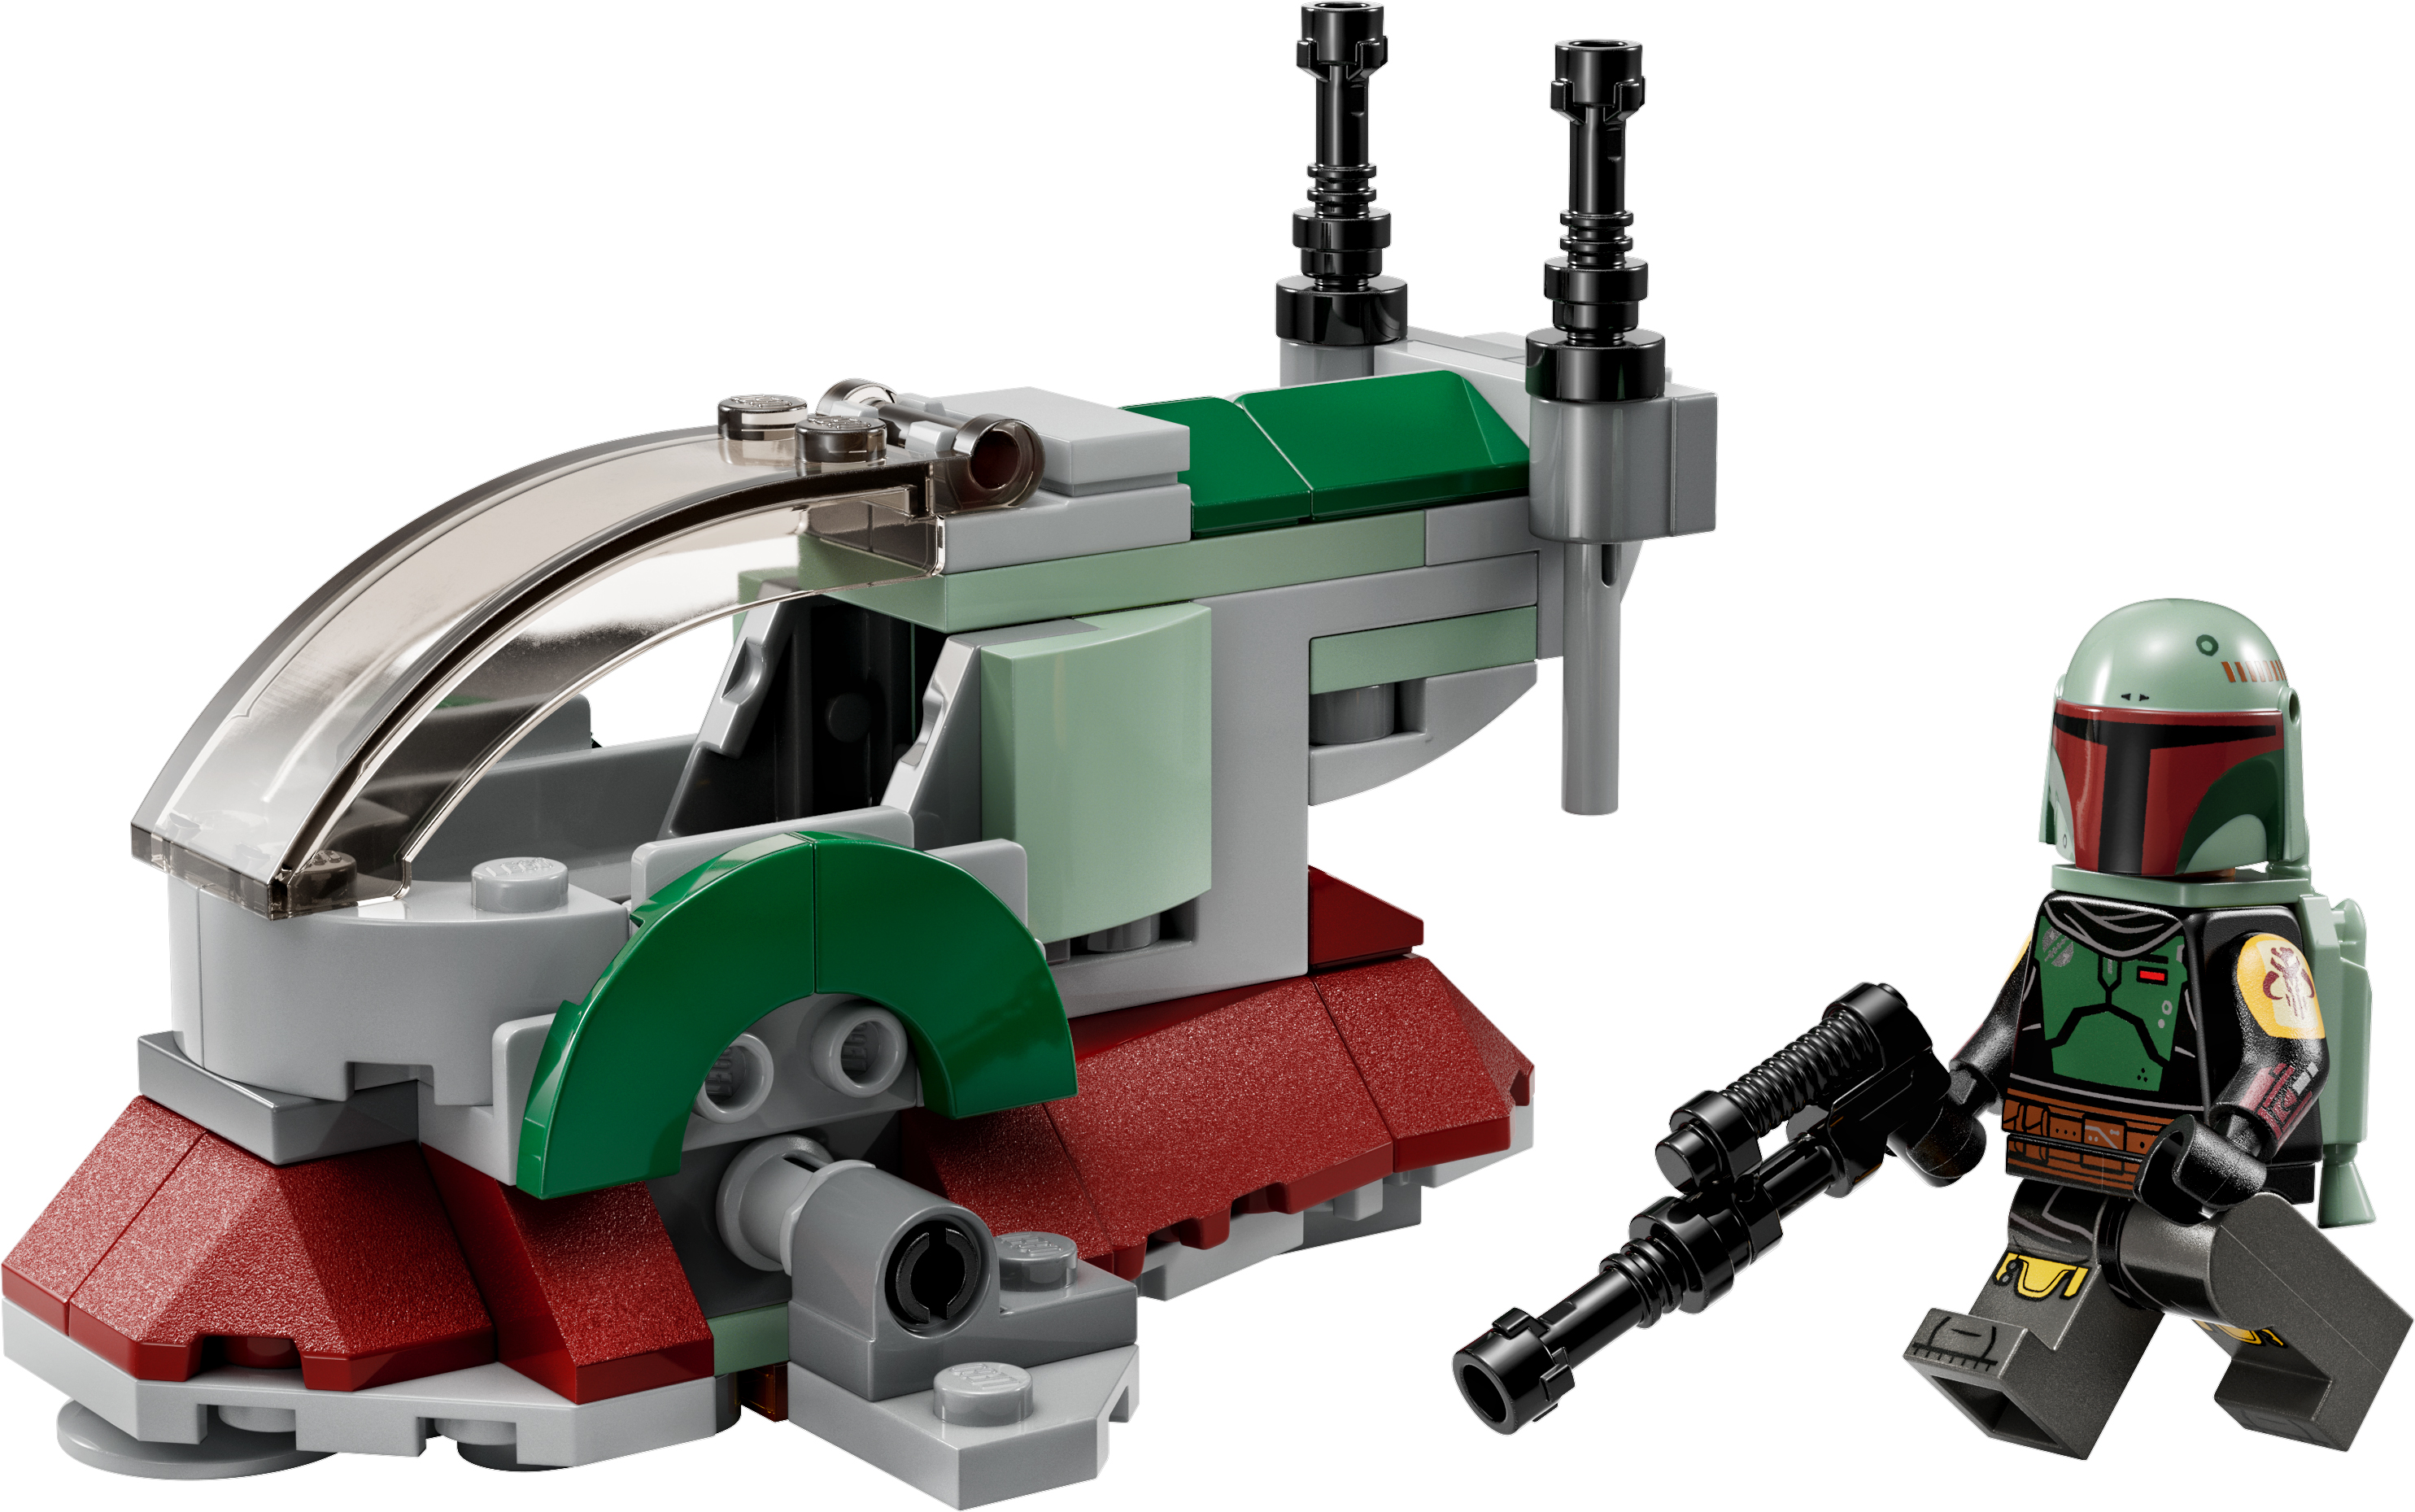 LEGO Reveals New 'Star Wars' Clone Wars Era Battle Pack and 'Young